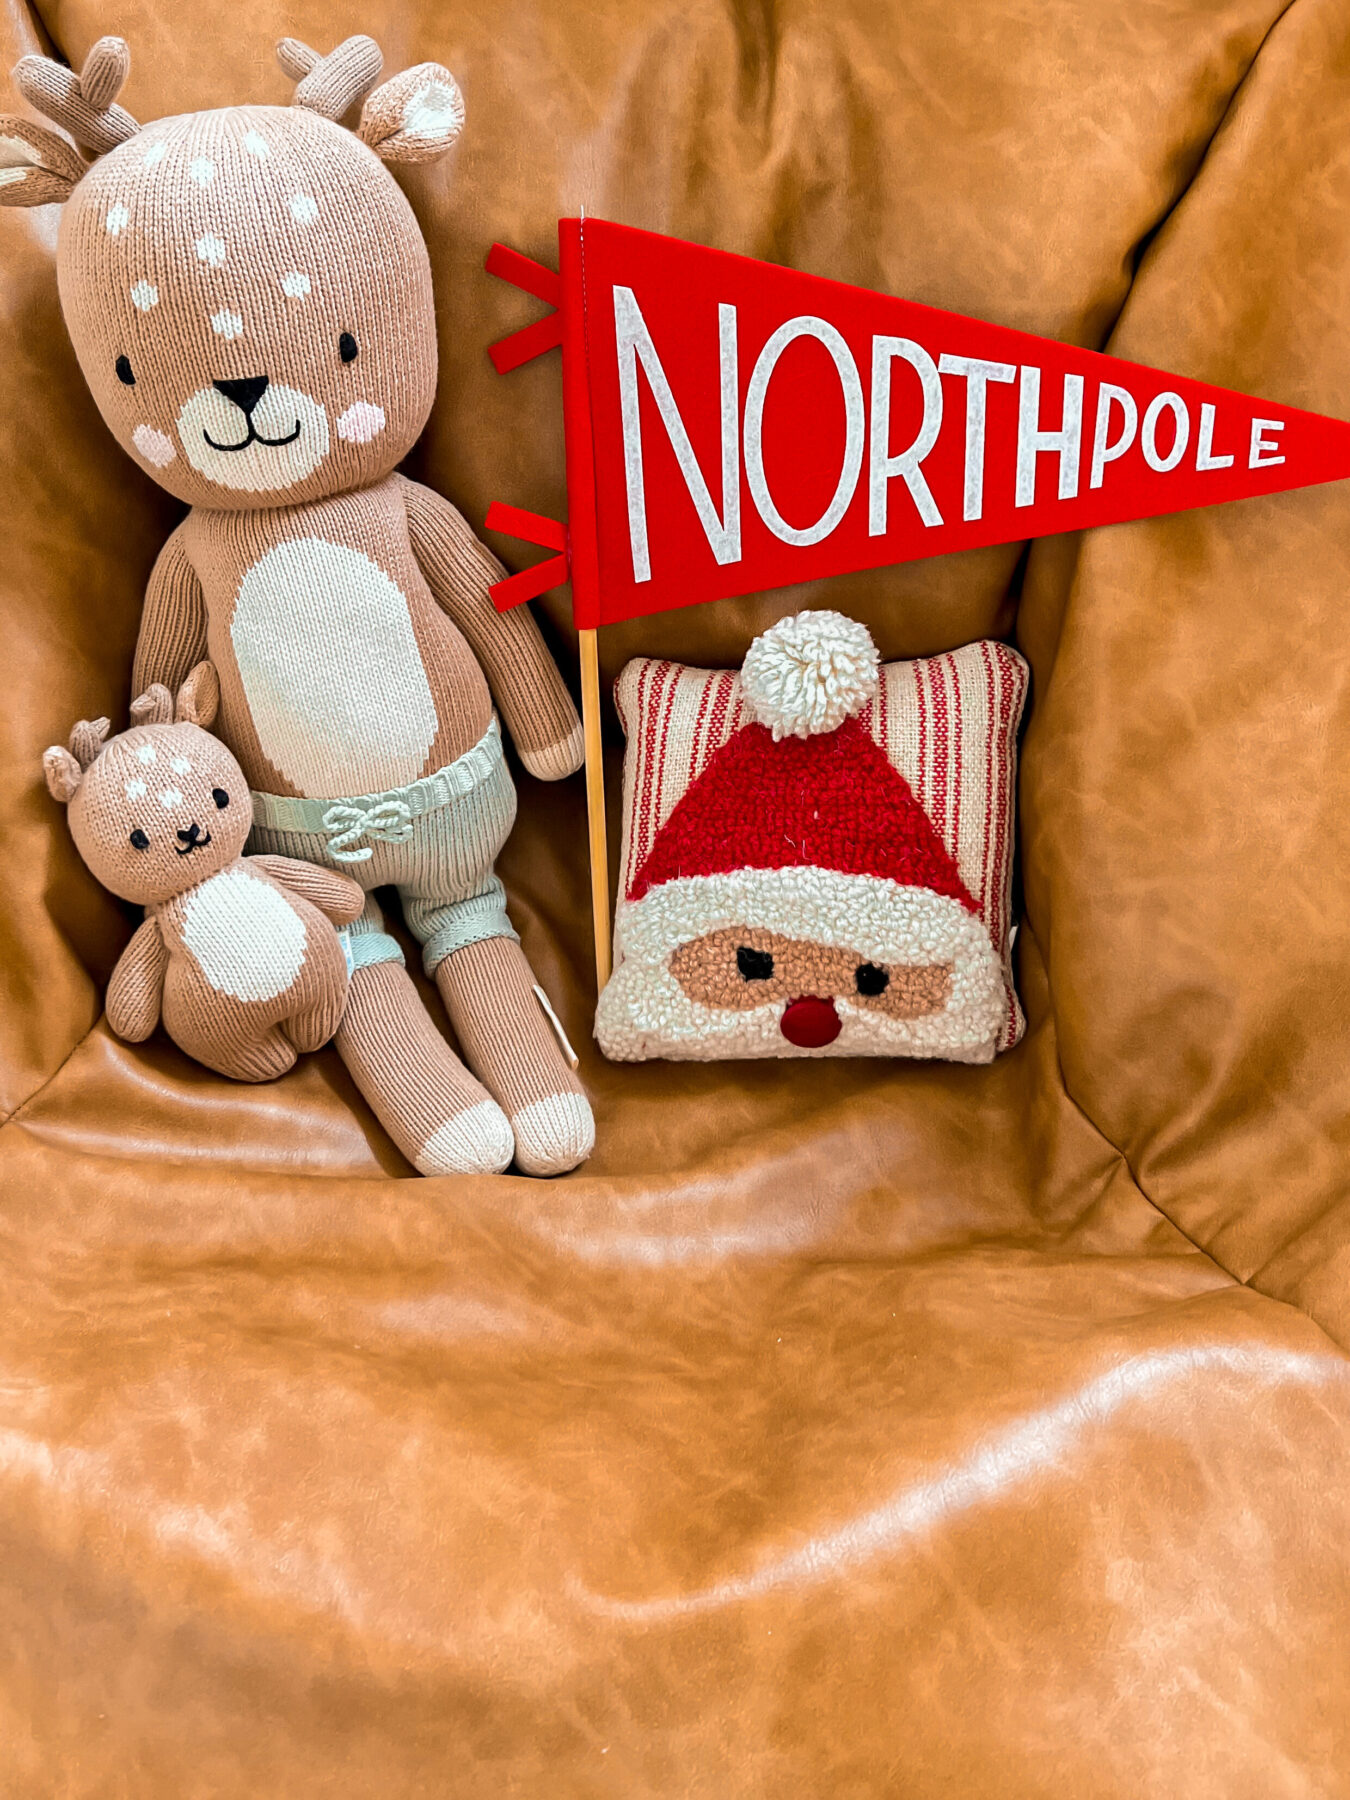 In a child bedroom, there is a Pottery Barn Teen leather ottoman sitting pouf on the floor. On the ottoman is a Cuddle and Kind deer and a small baby Cuddle and Kind doll deer. There is a medium sized red pennant flag with white lettering that says "North Pole." There is also a mini square pillow with a Santa face knitted on the front.